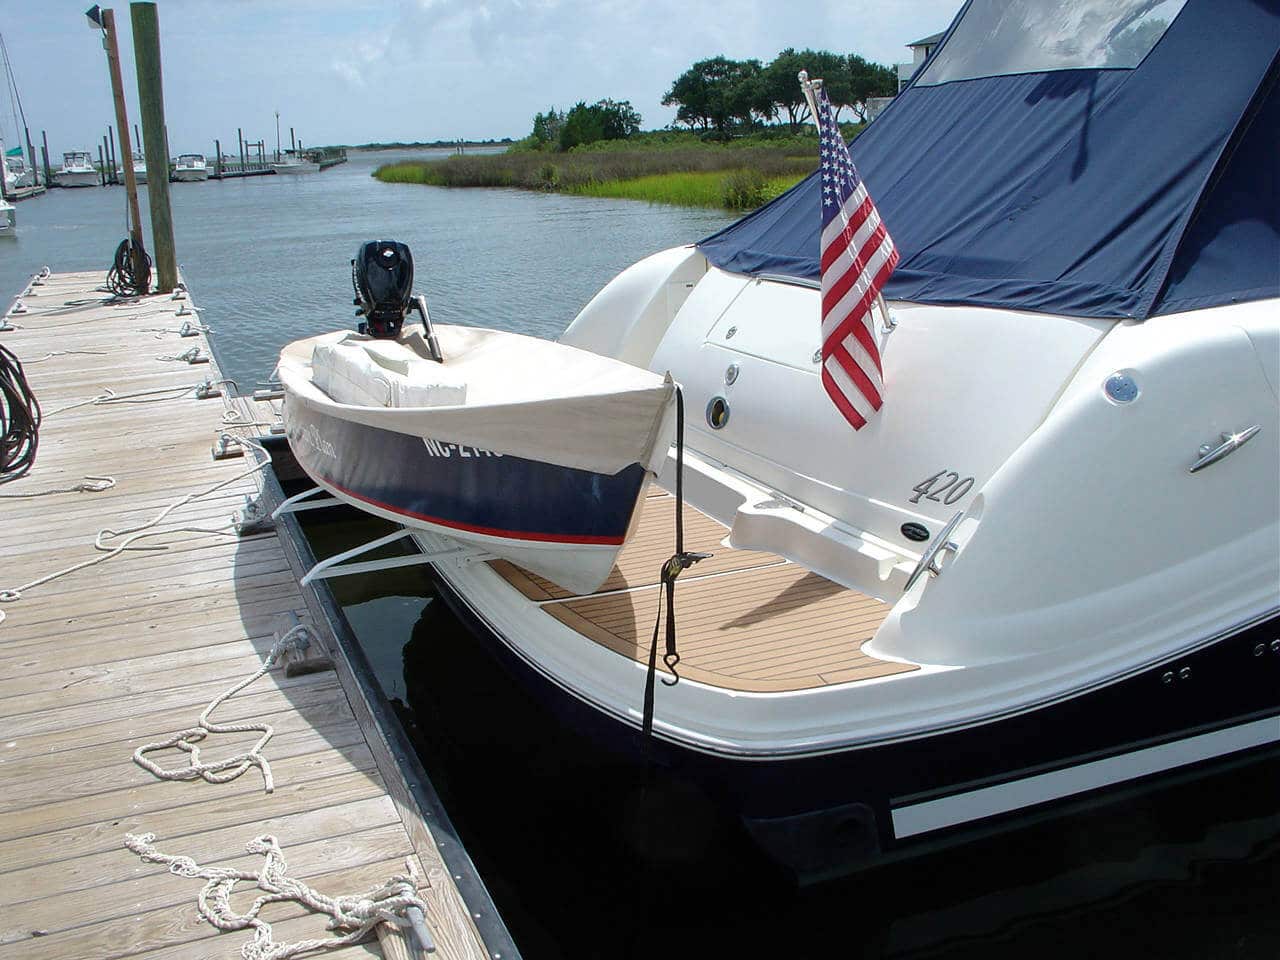 42' Searay Boat with Dinghy